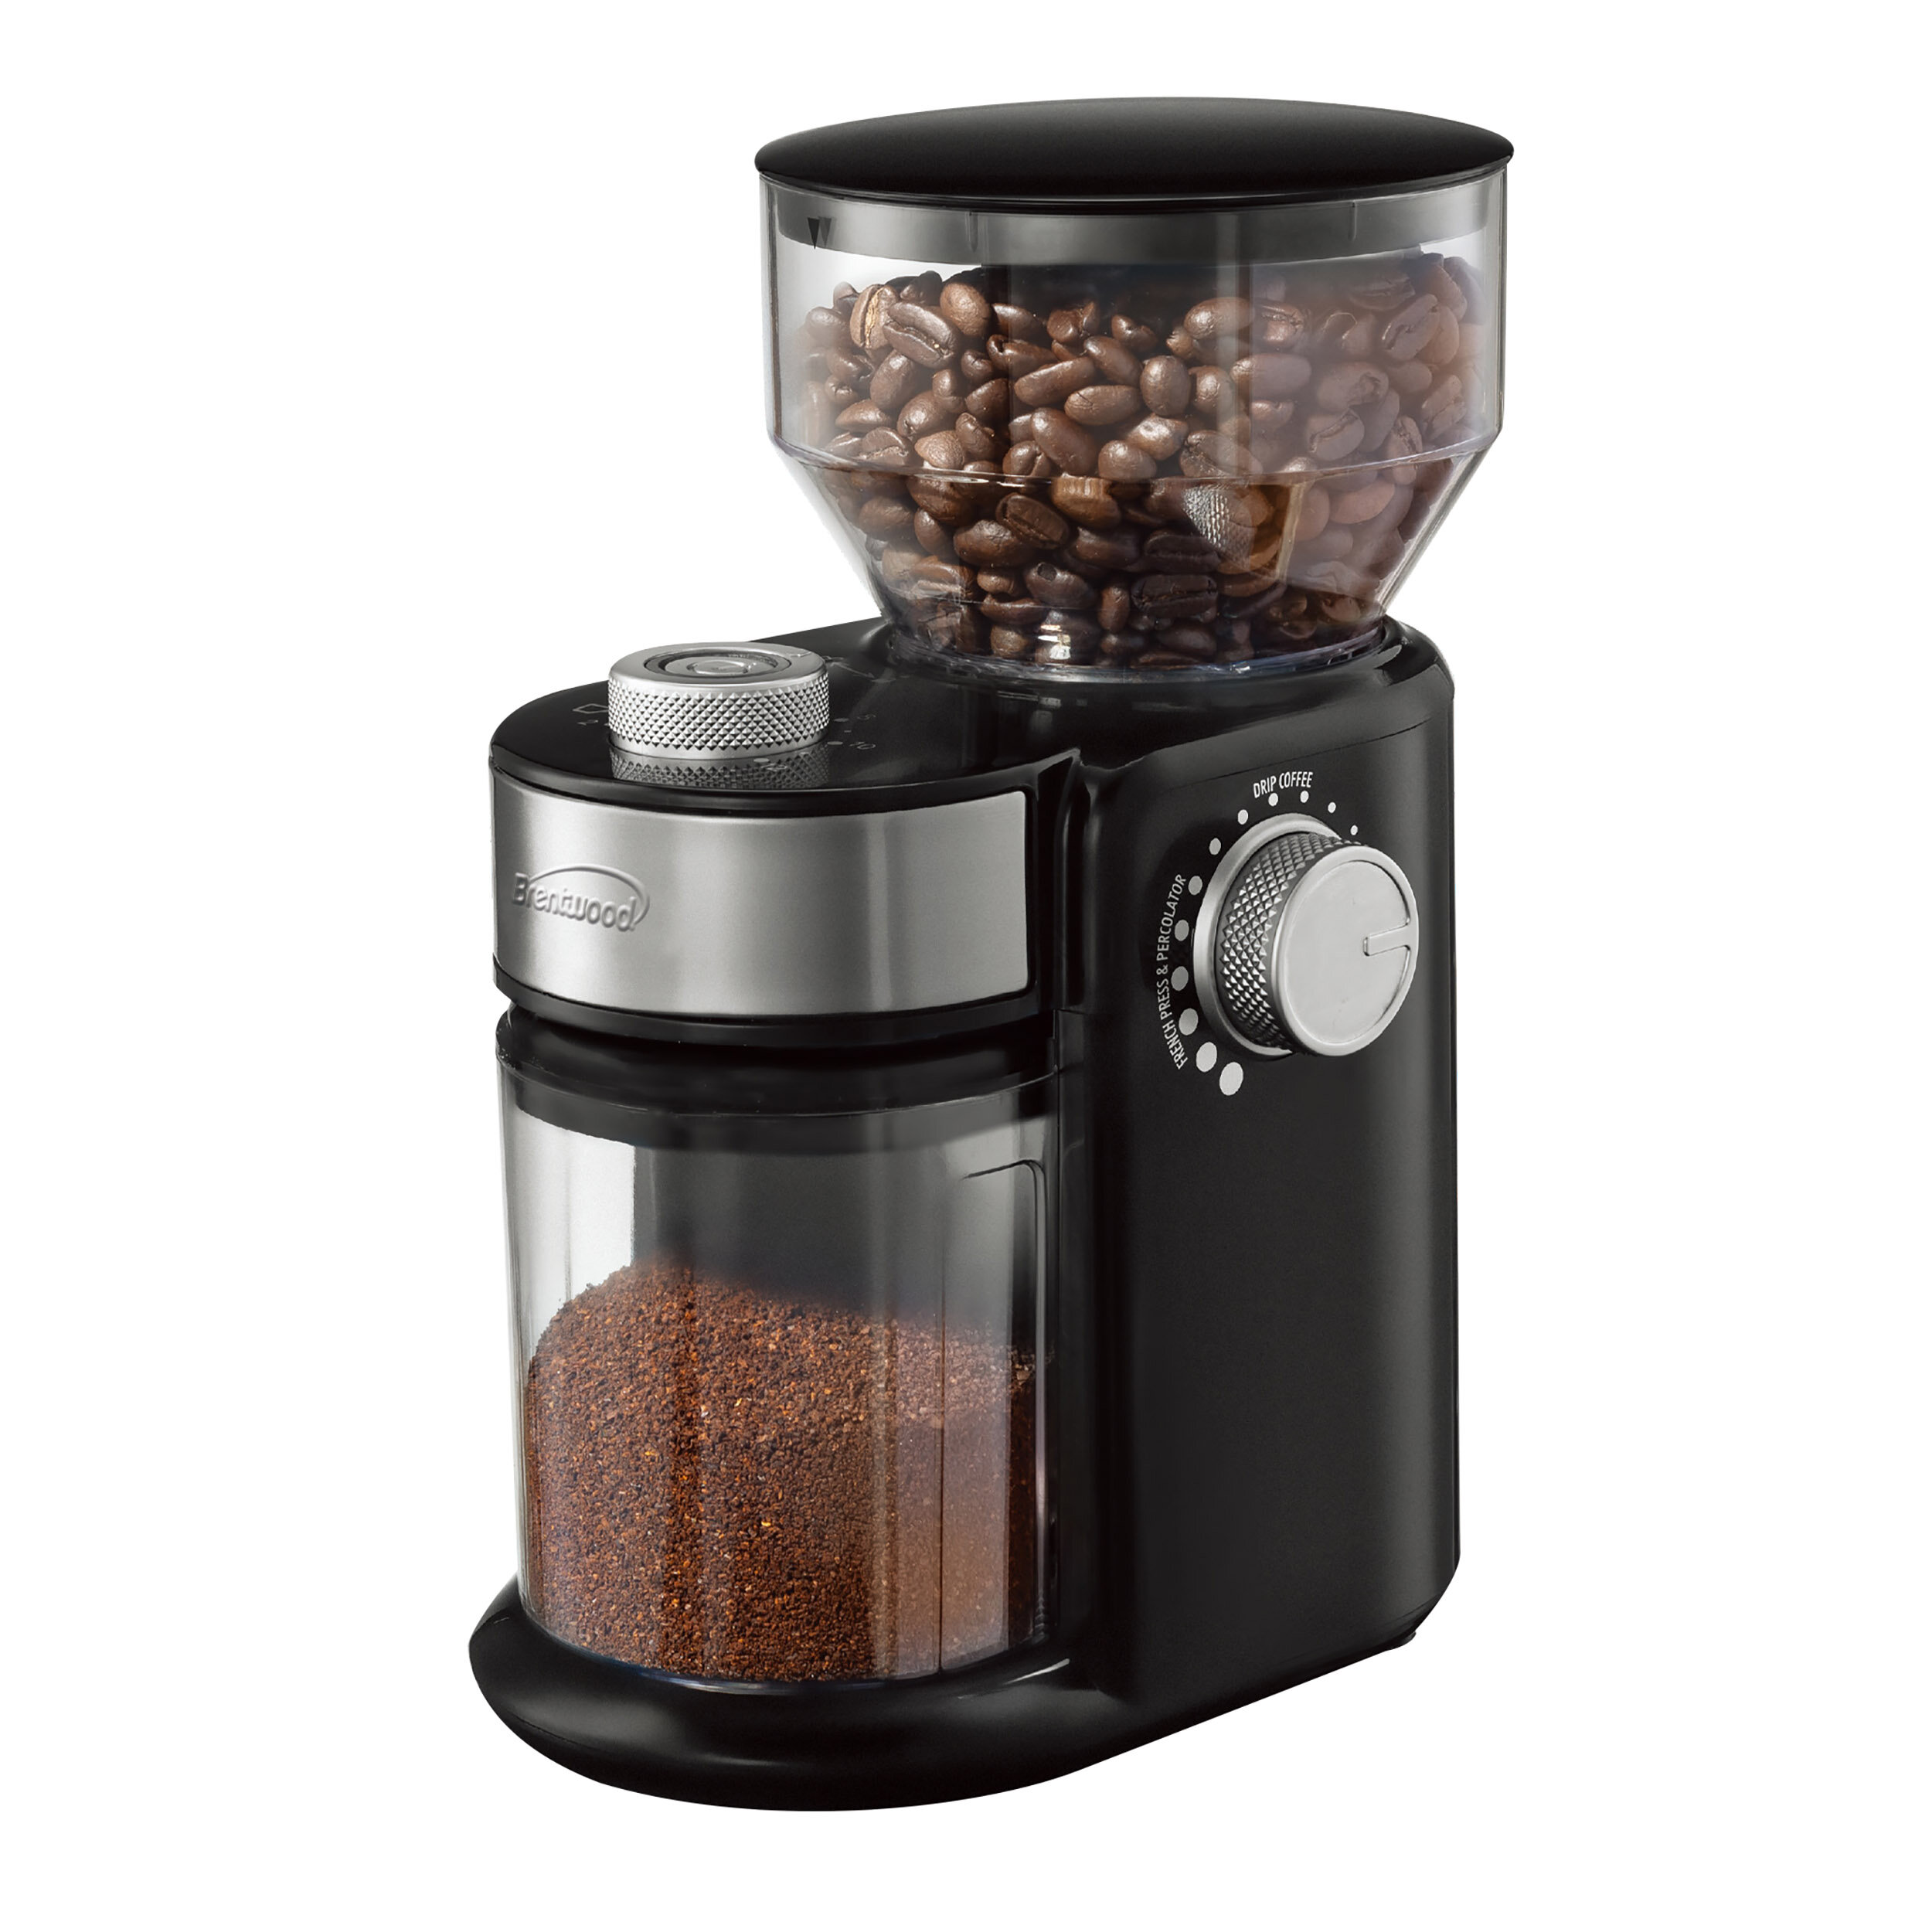 DETAILED REVIEW Gourmia 12 Cup Programmable Grind & Brew Coffee